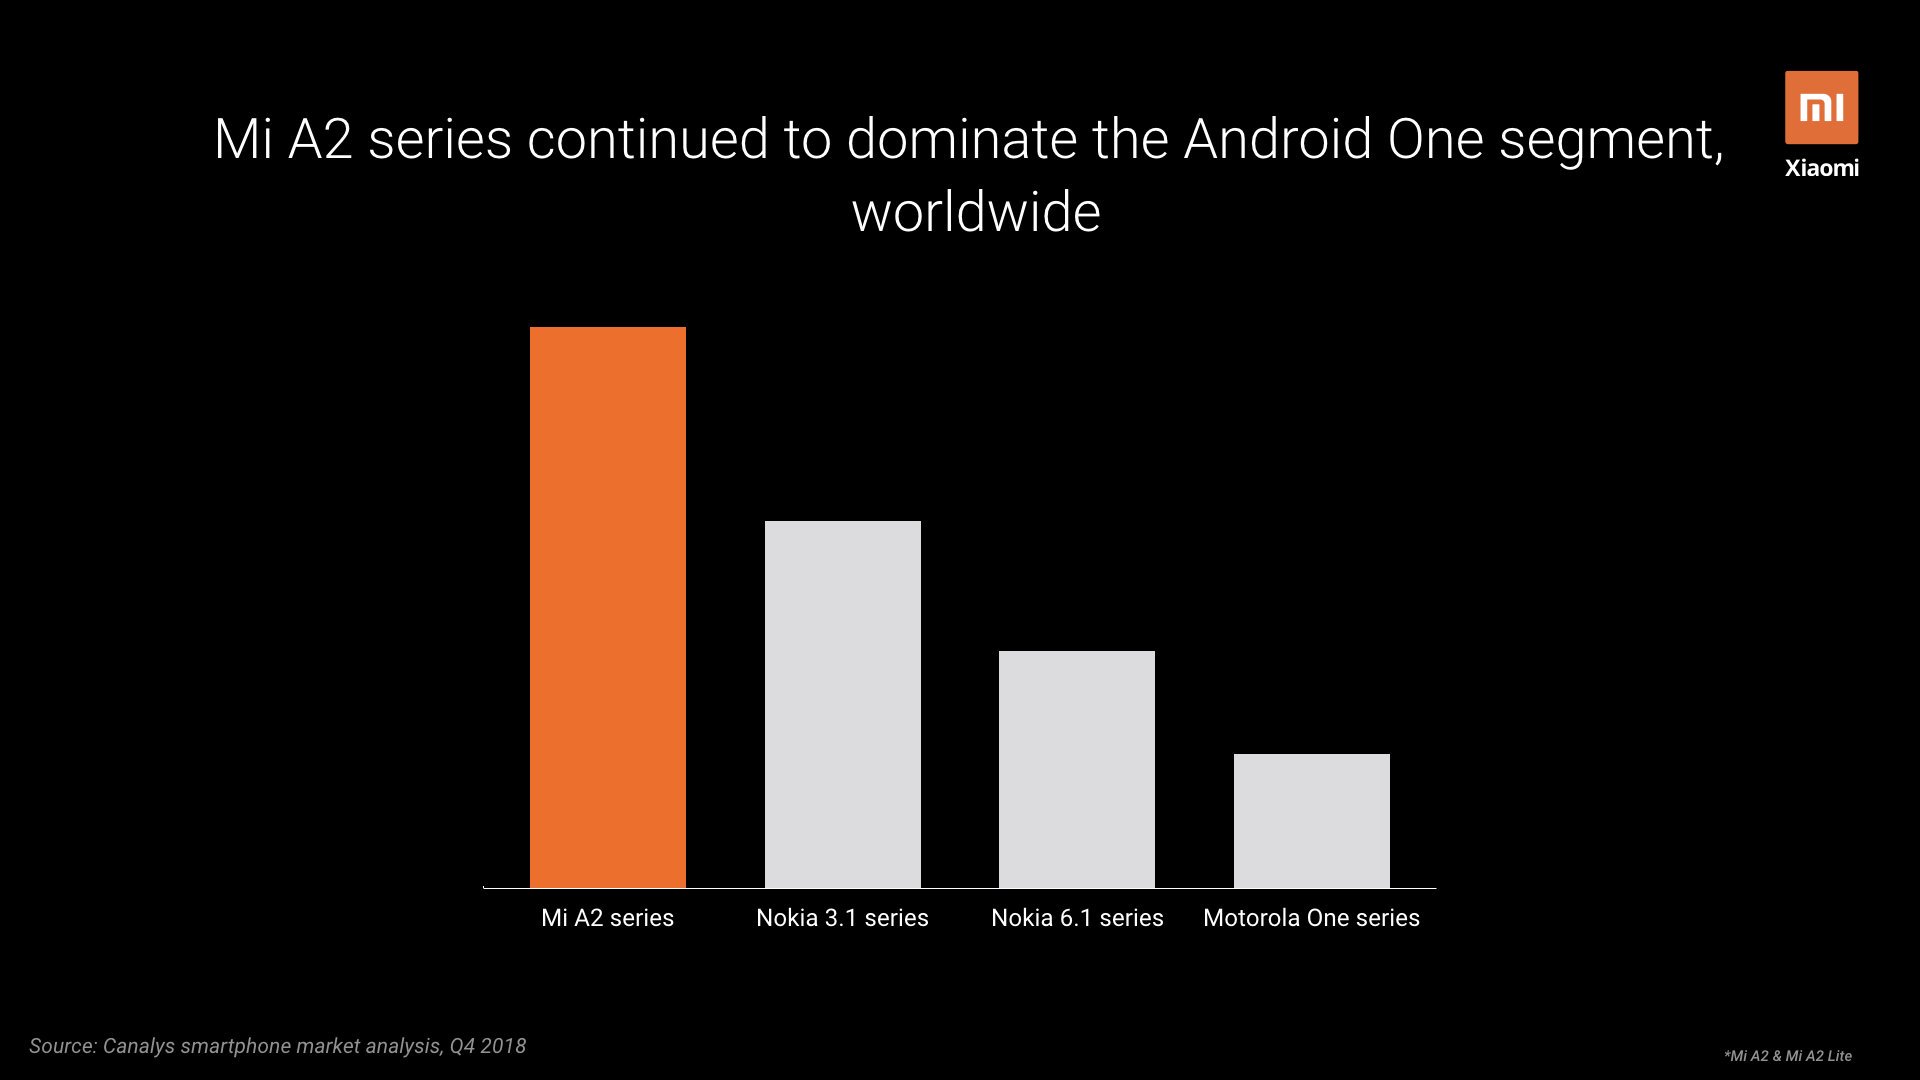 Xiaomi Mi A-series models are the top-selling Android One 2